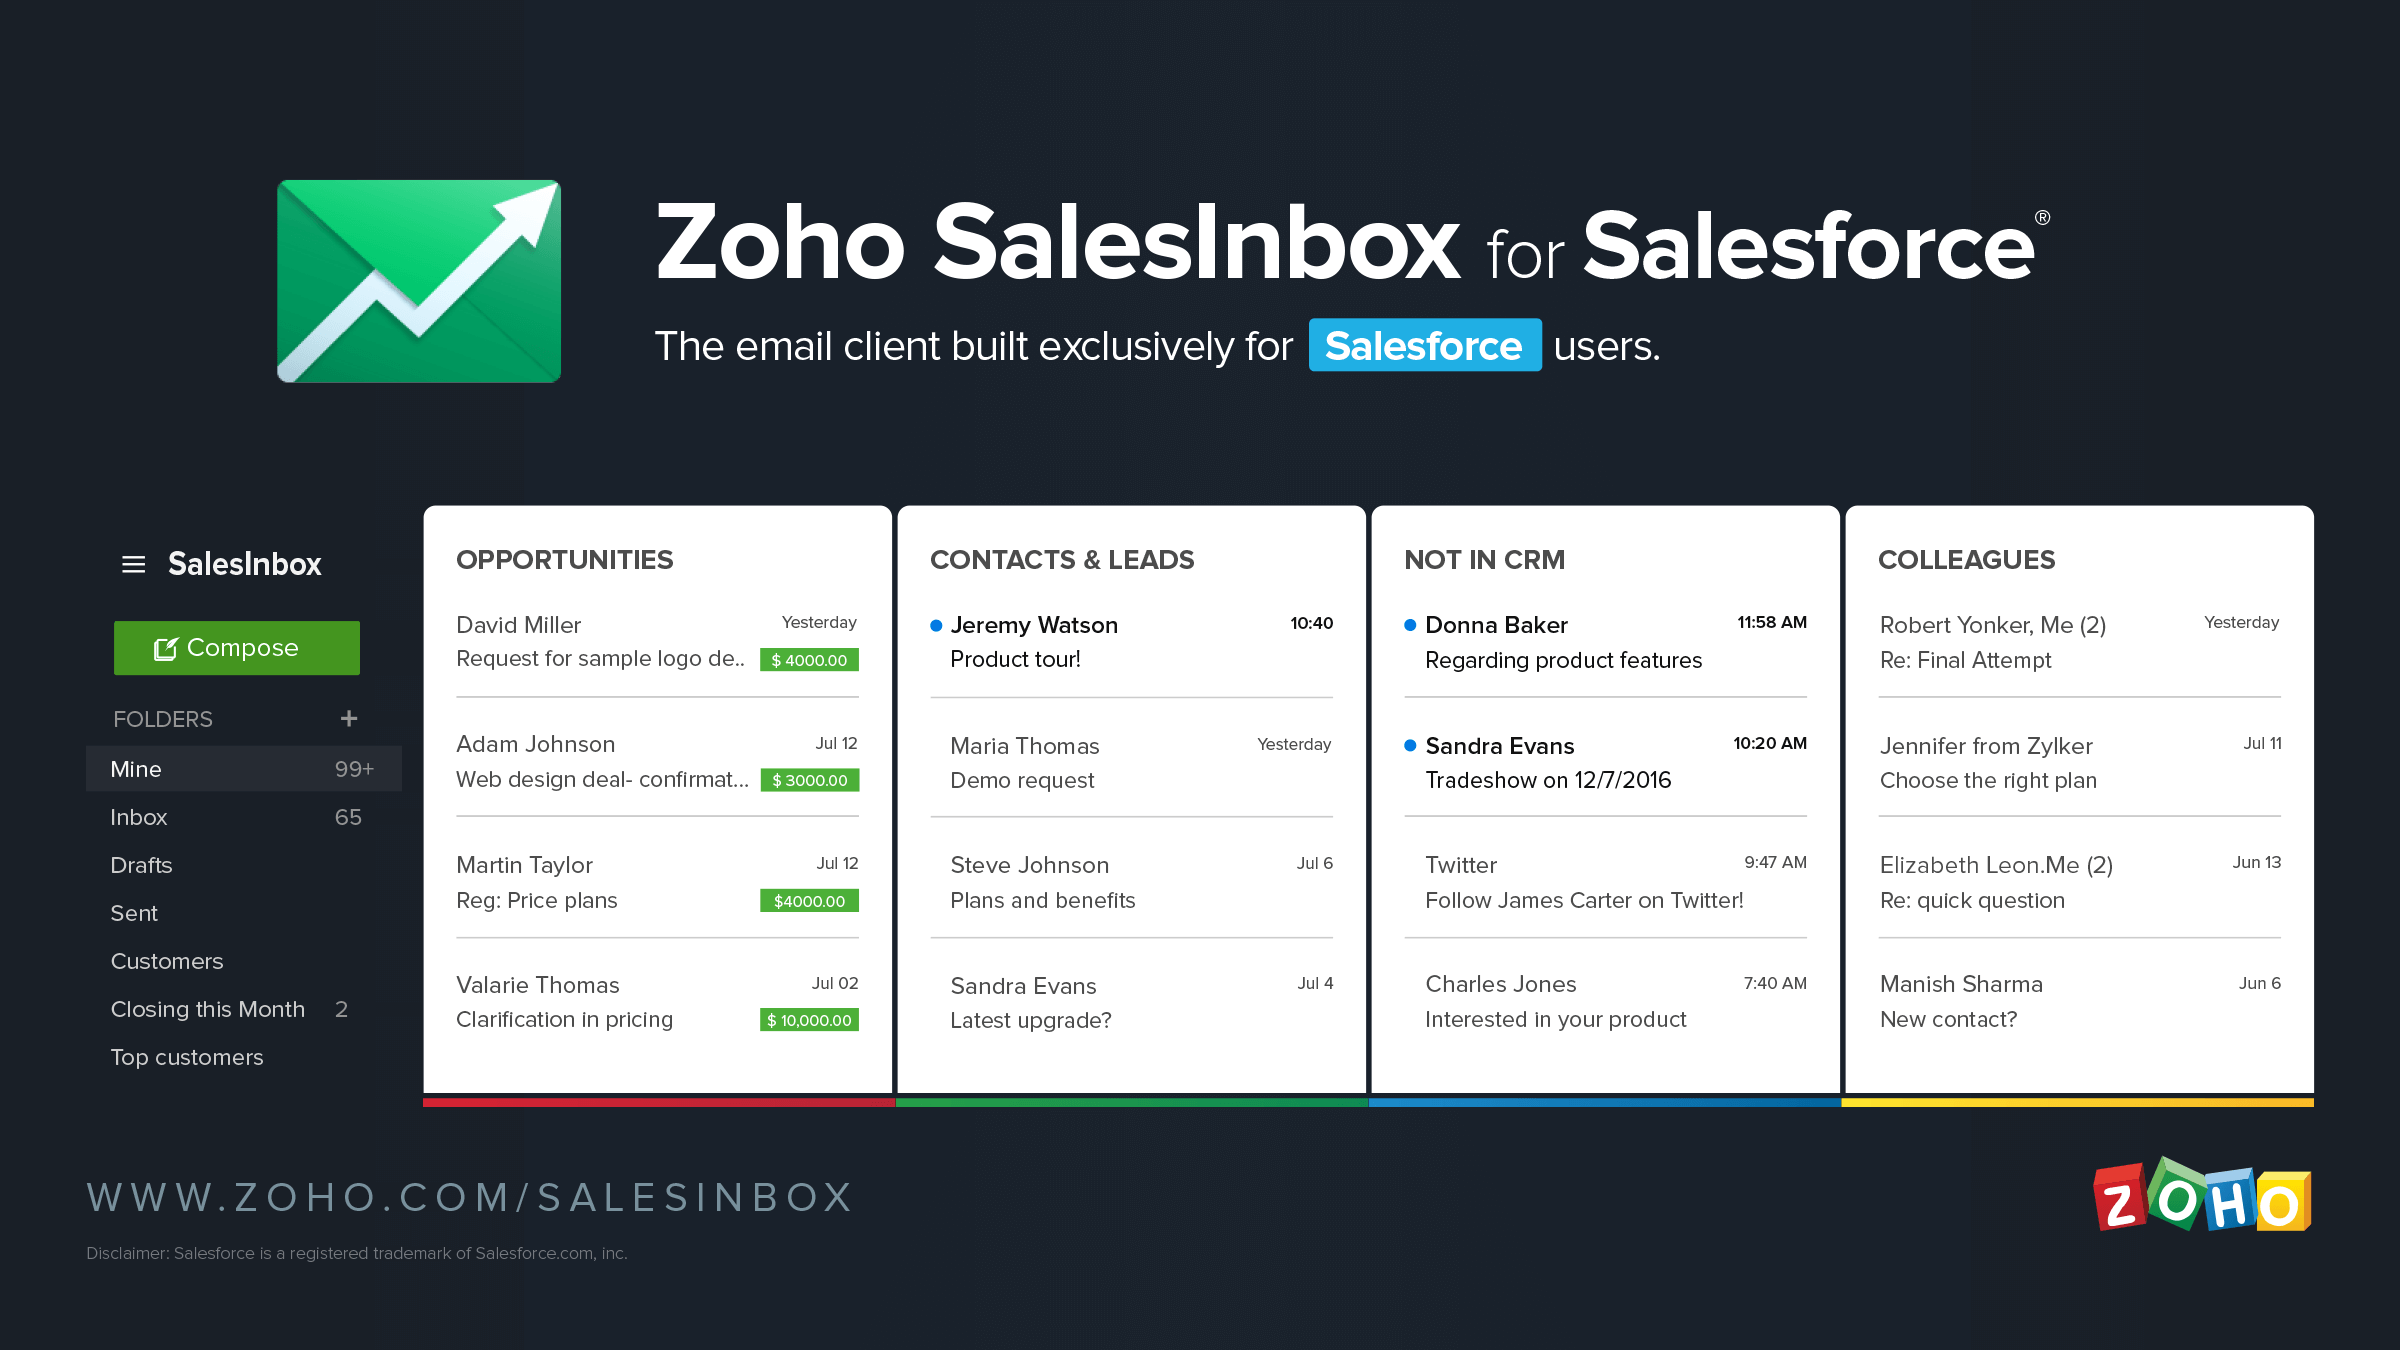 Announcing Zoho SalesInbox for Salesforce